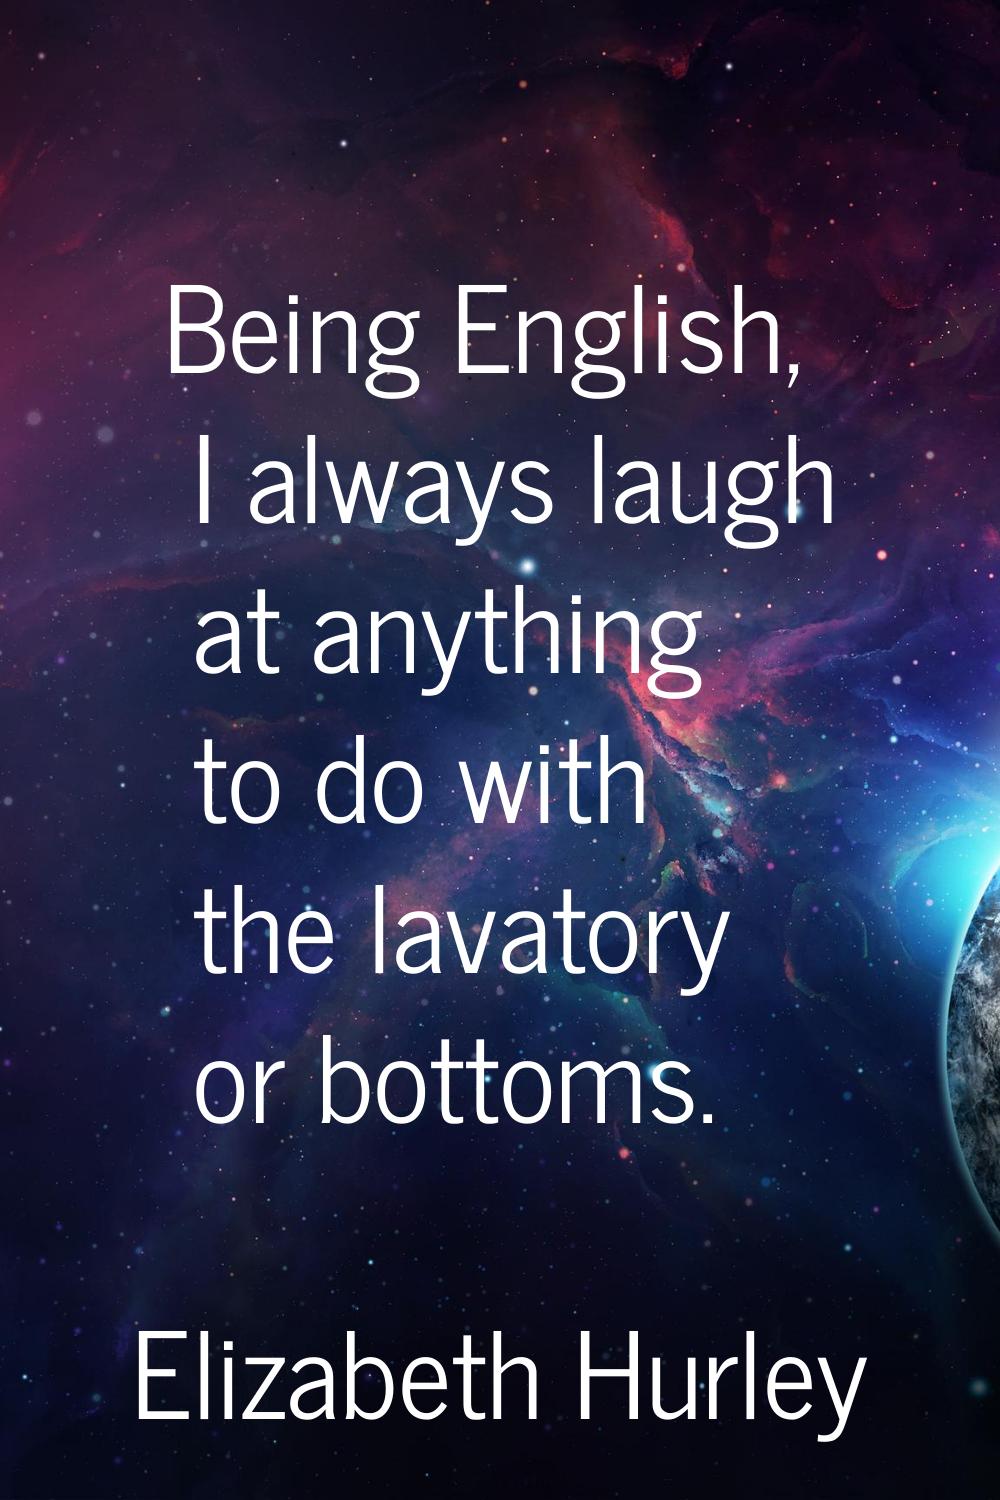 Being English, I always laugh at anything to do with the lavatory or bottoms.